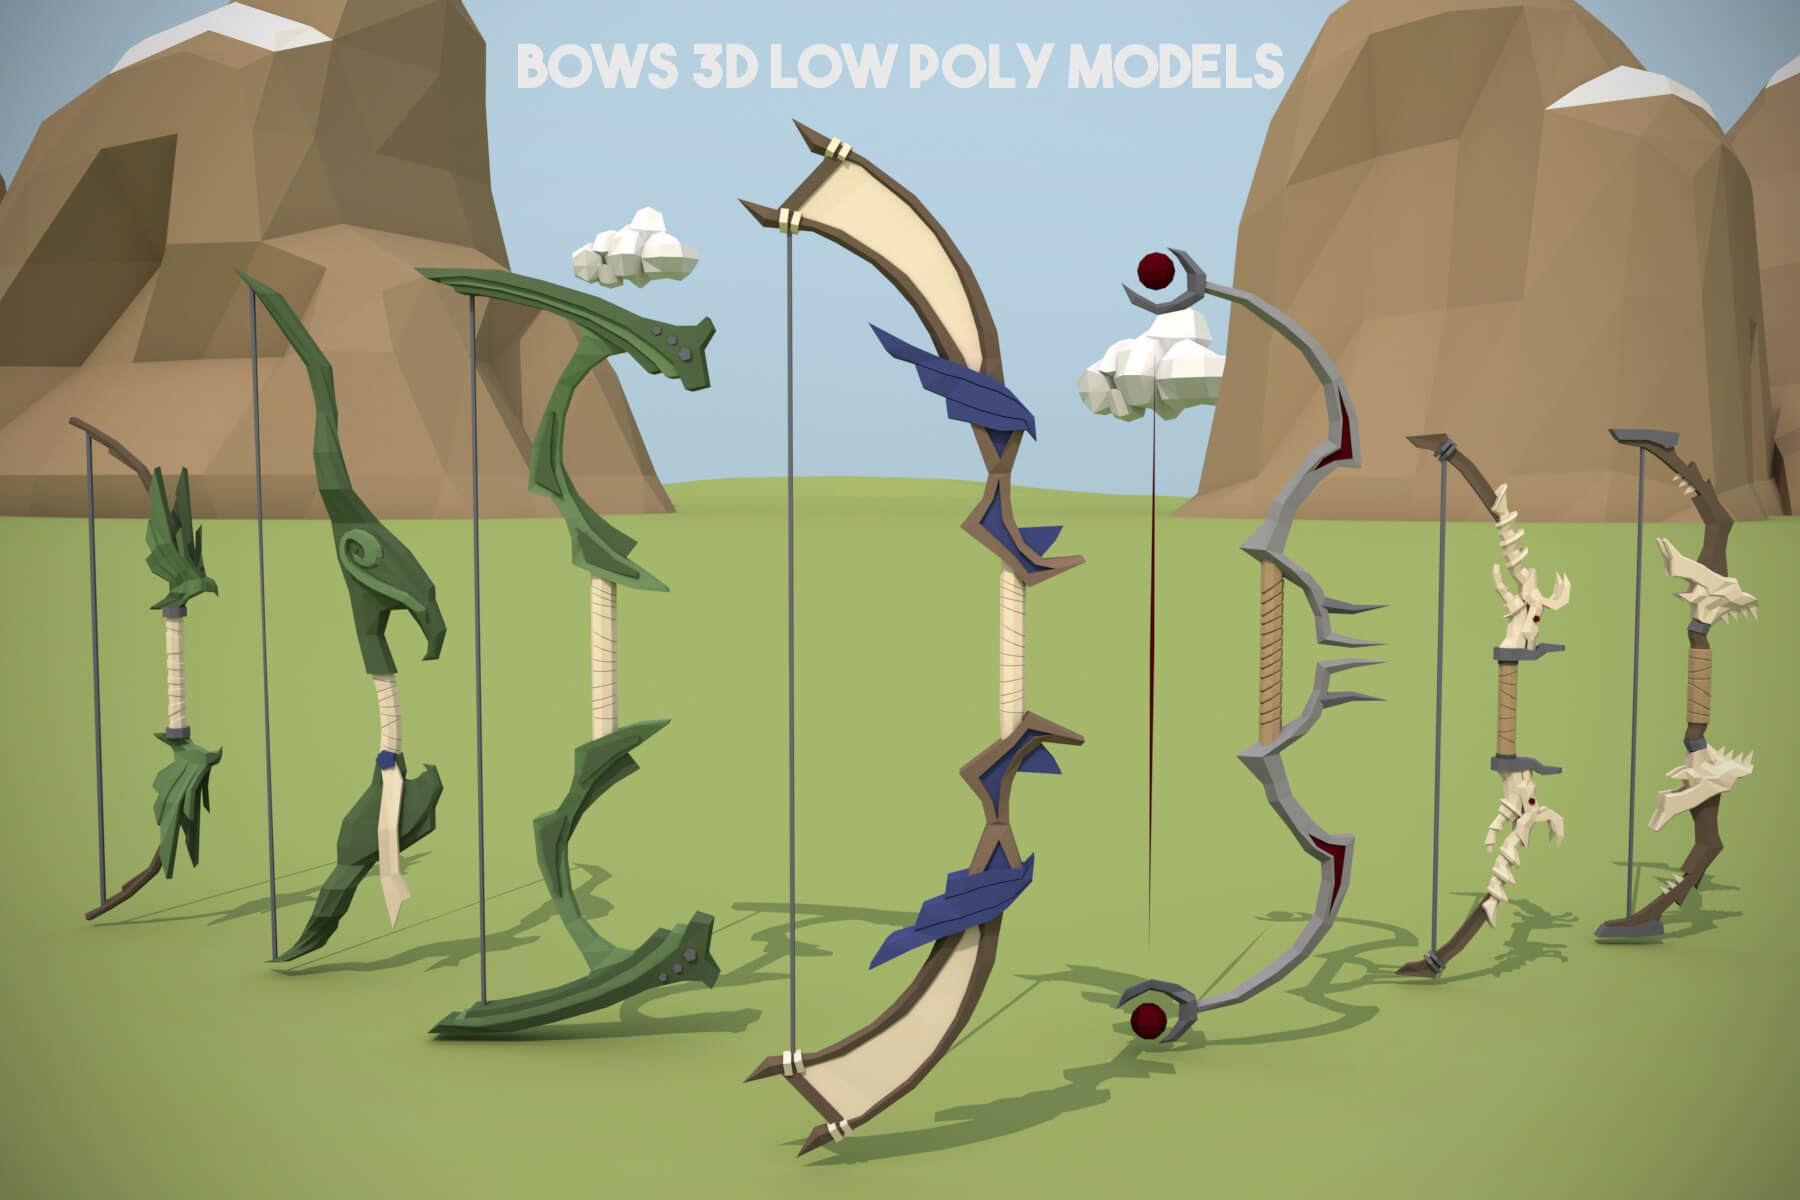 Bow 3D Low Poly Models